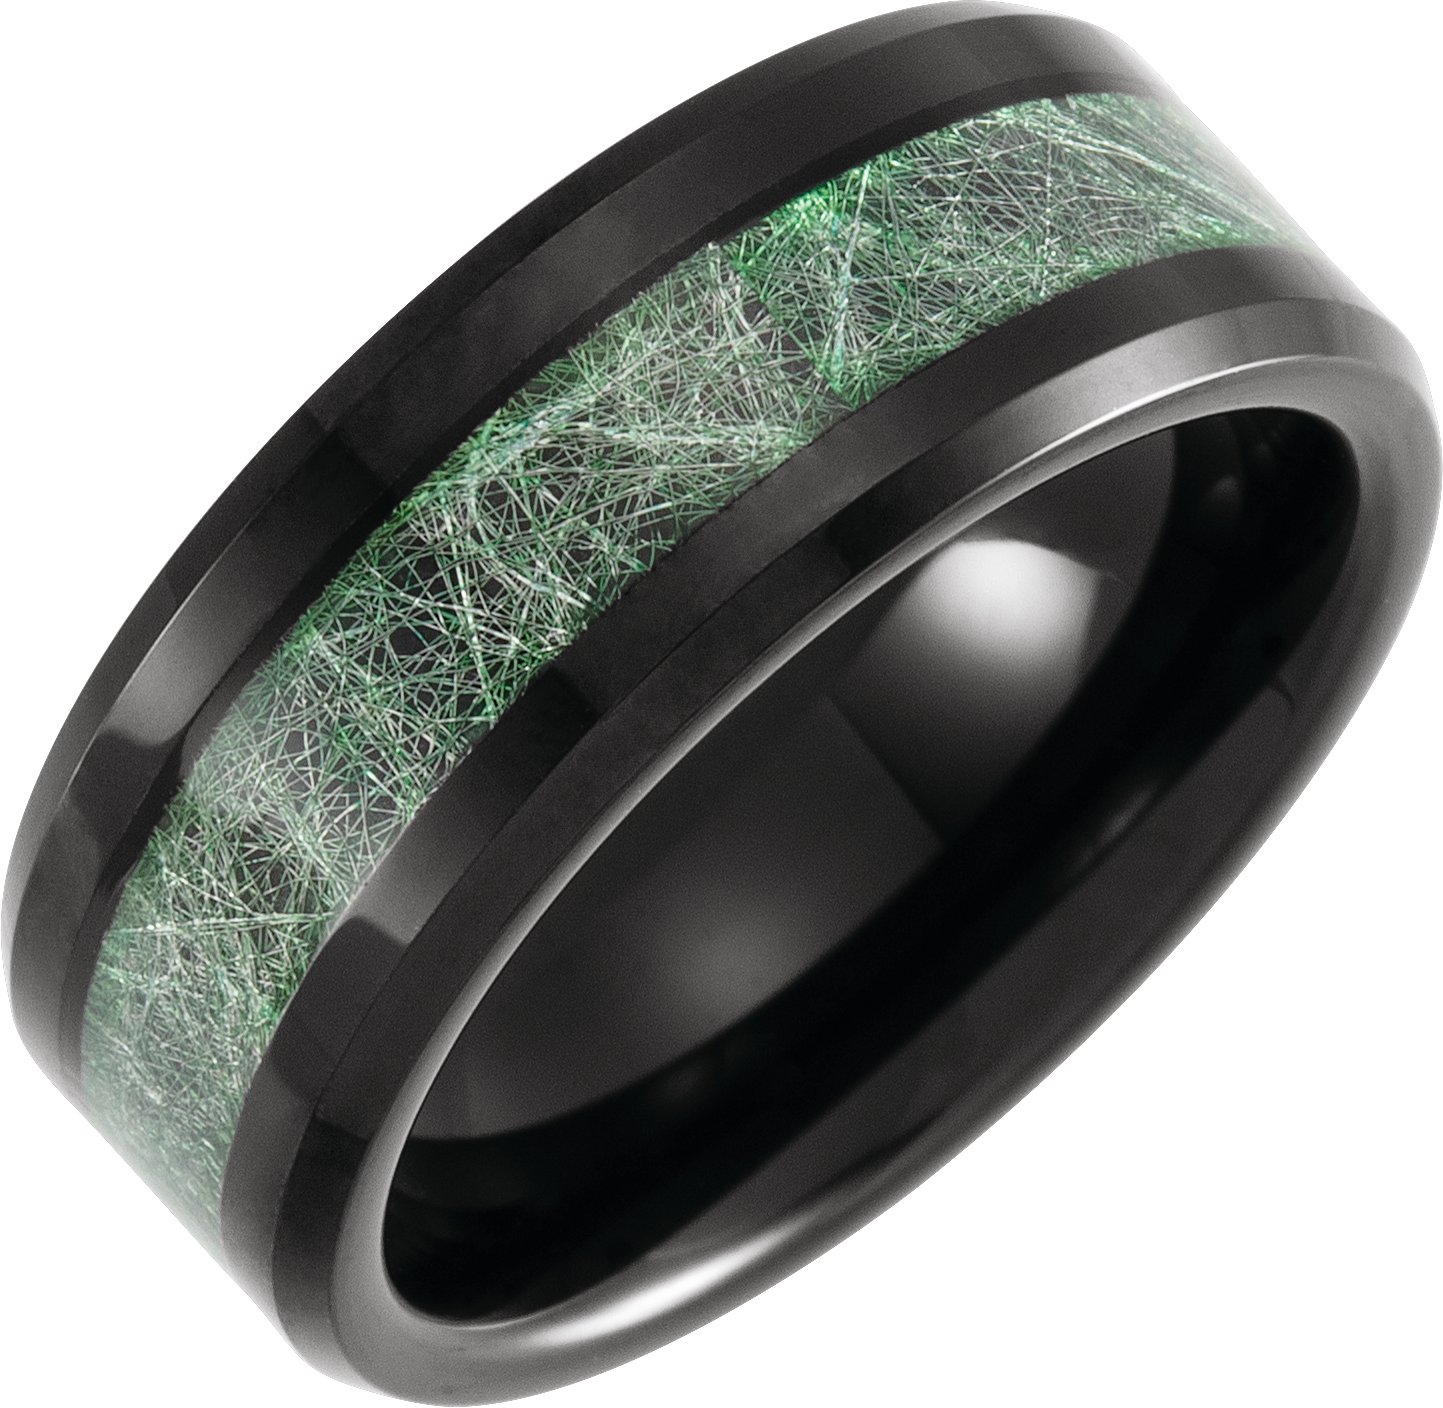 Tungsten 8 mm Beveled Band with Imitation Meteorite Inlay Size 8.5